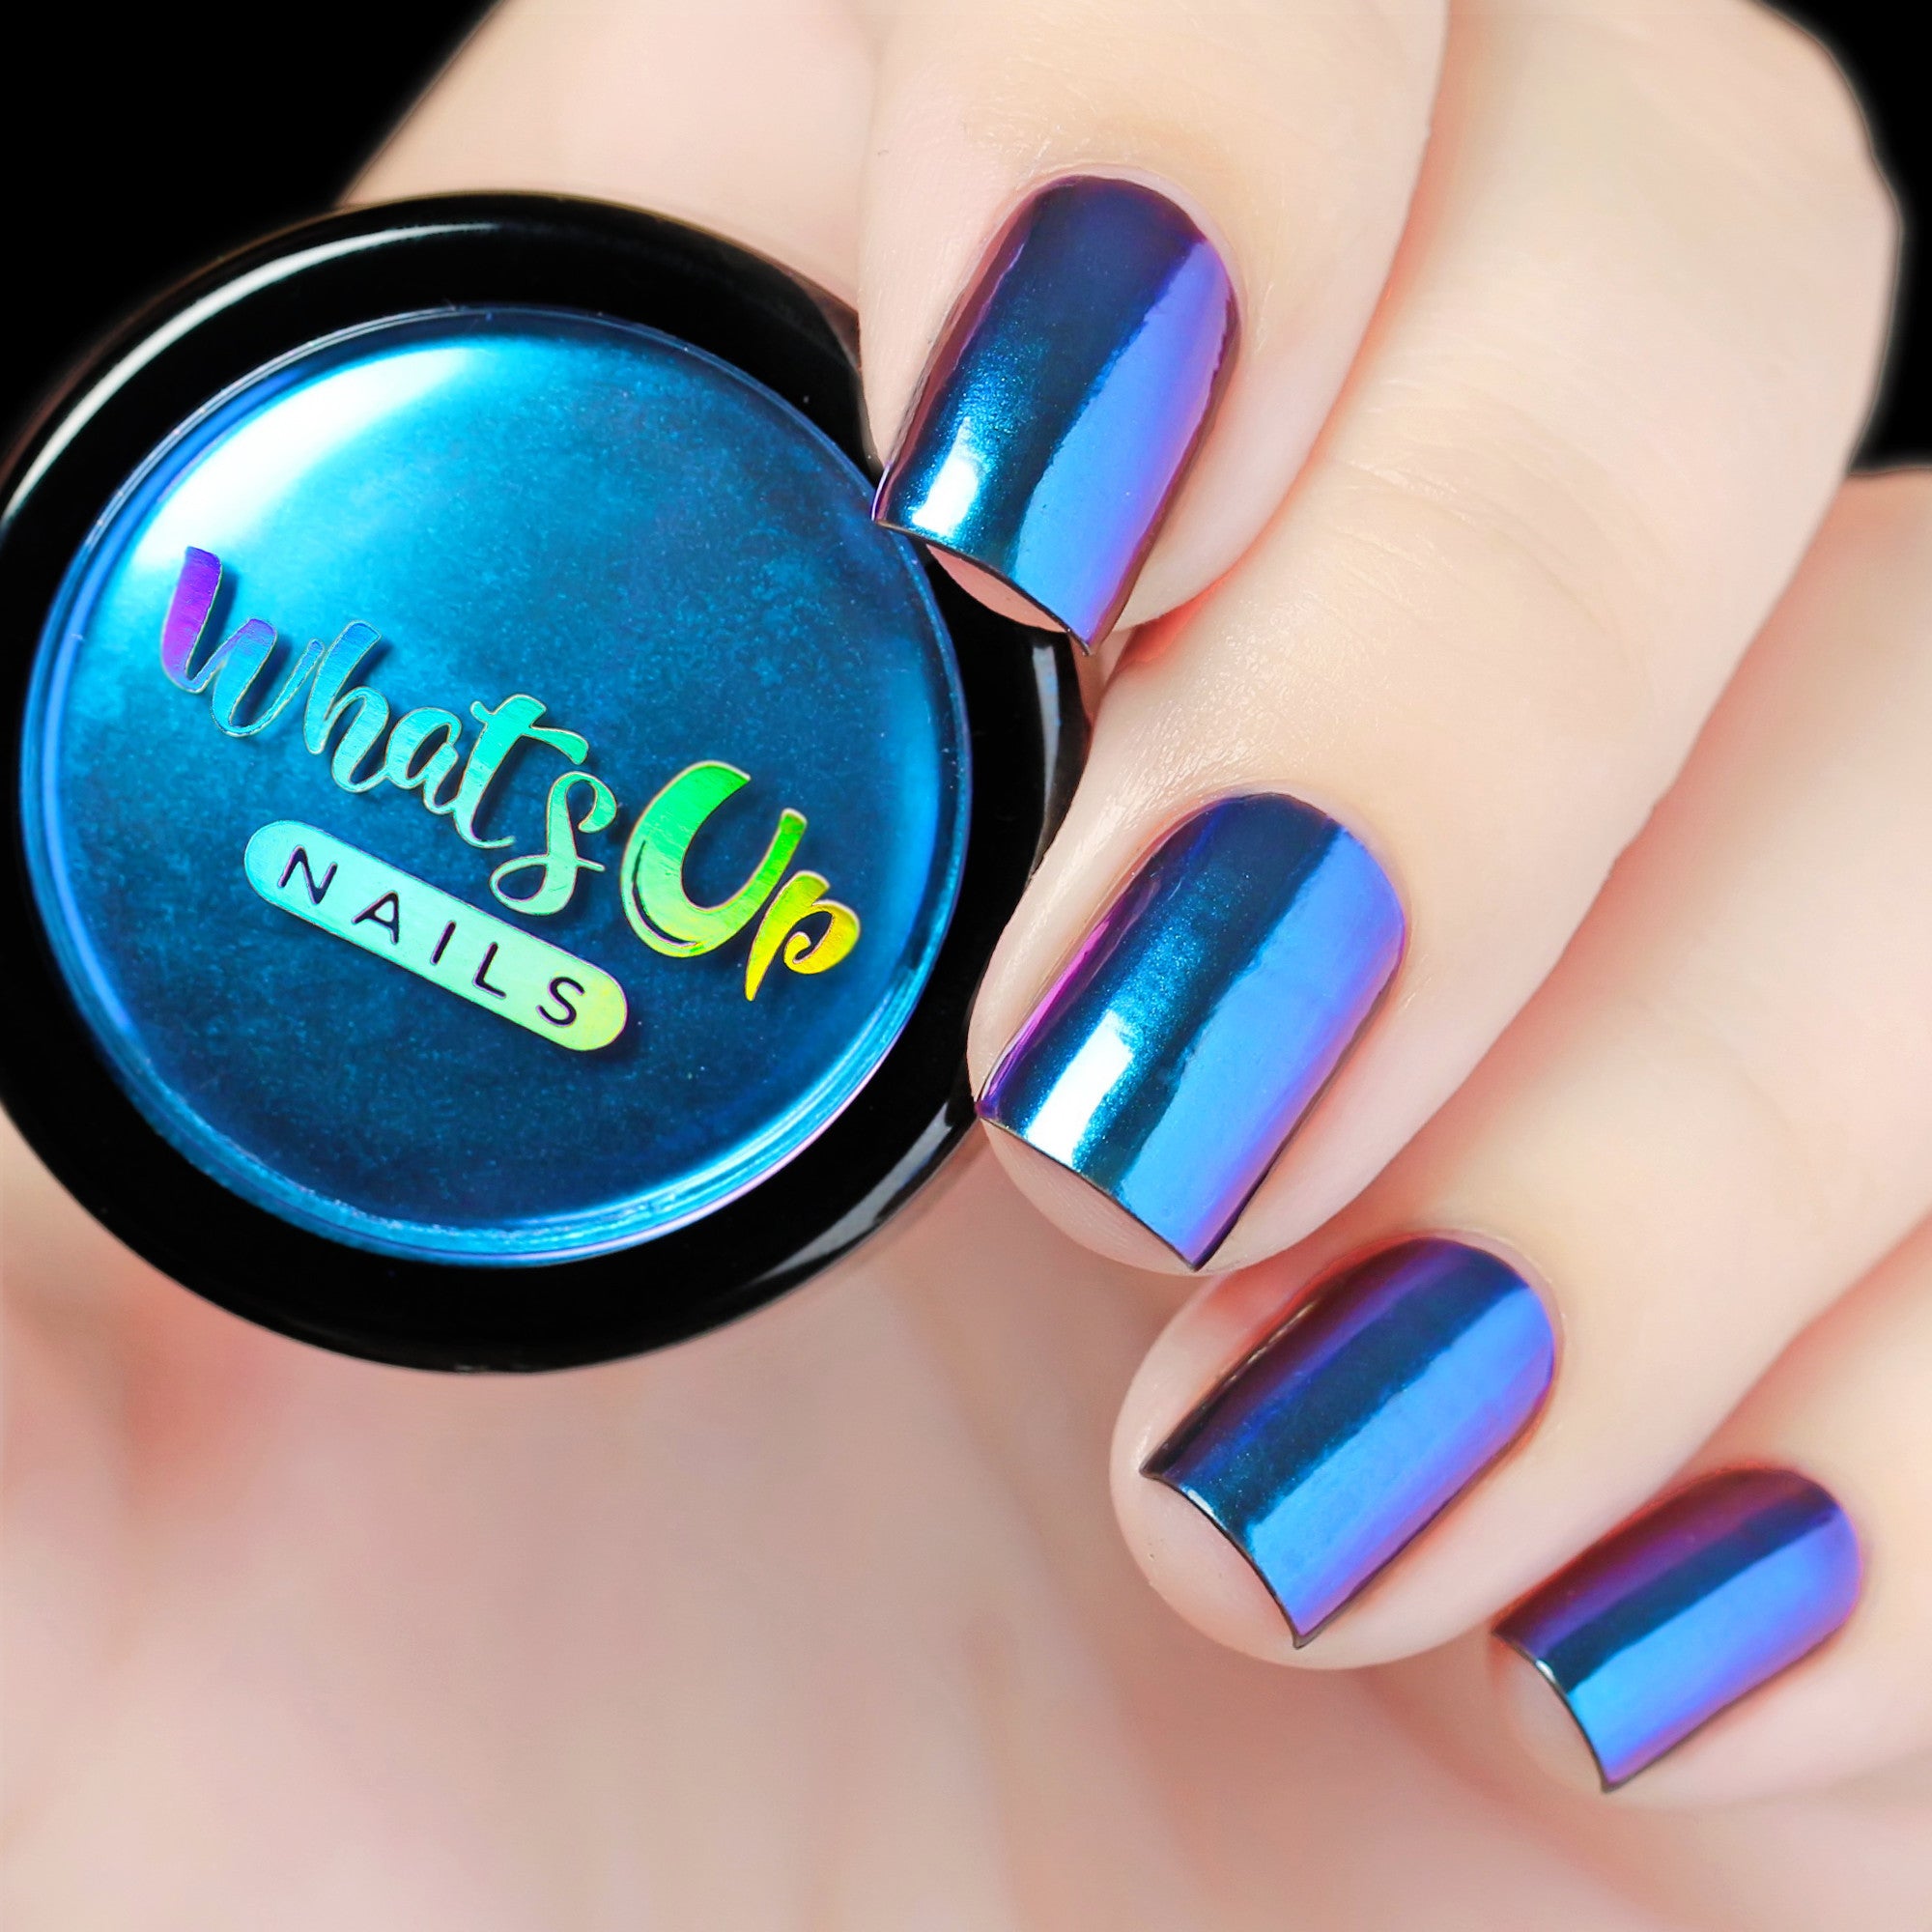 Chrome Powder for Nails - Whats Up Nails